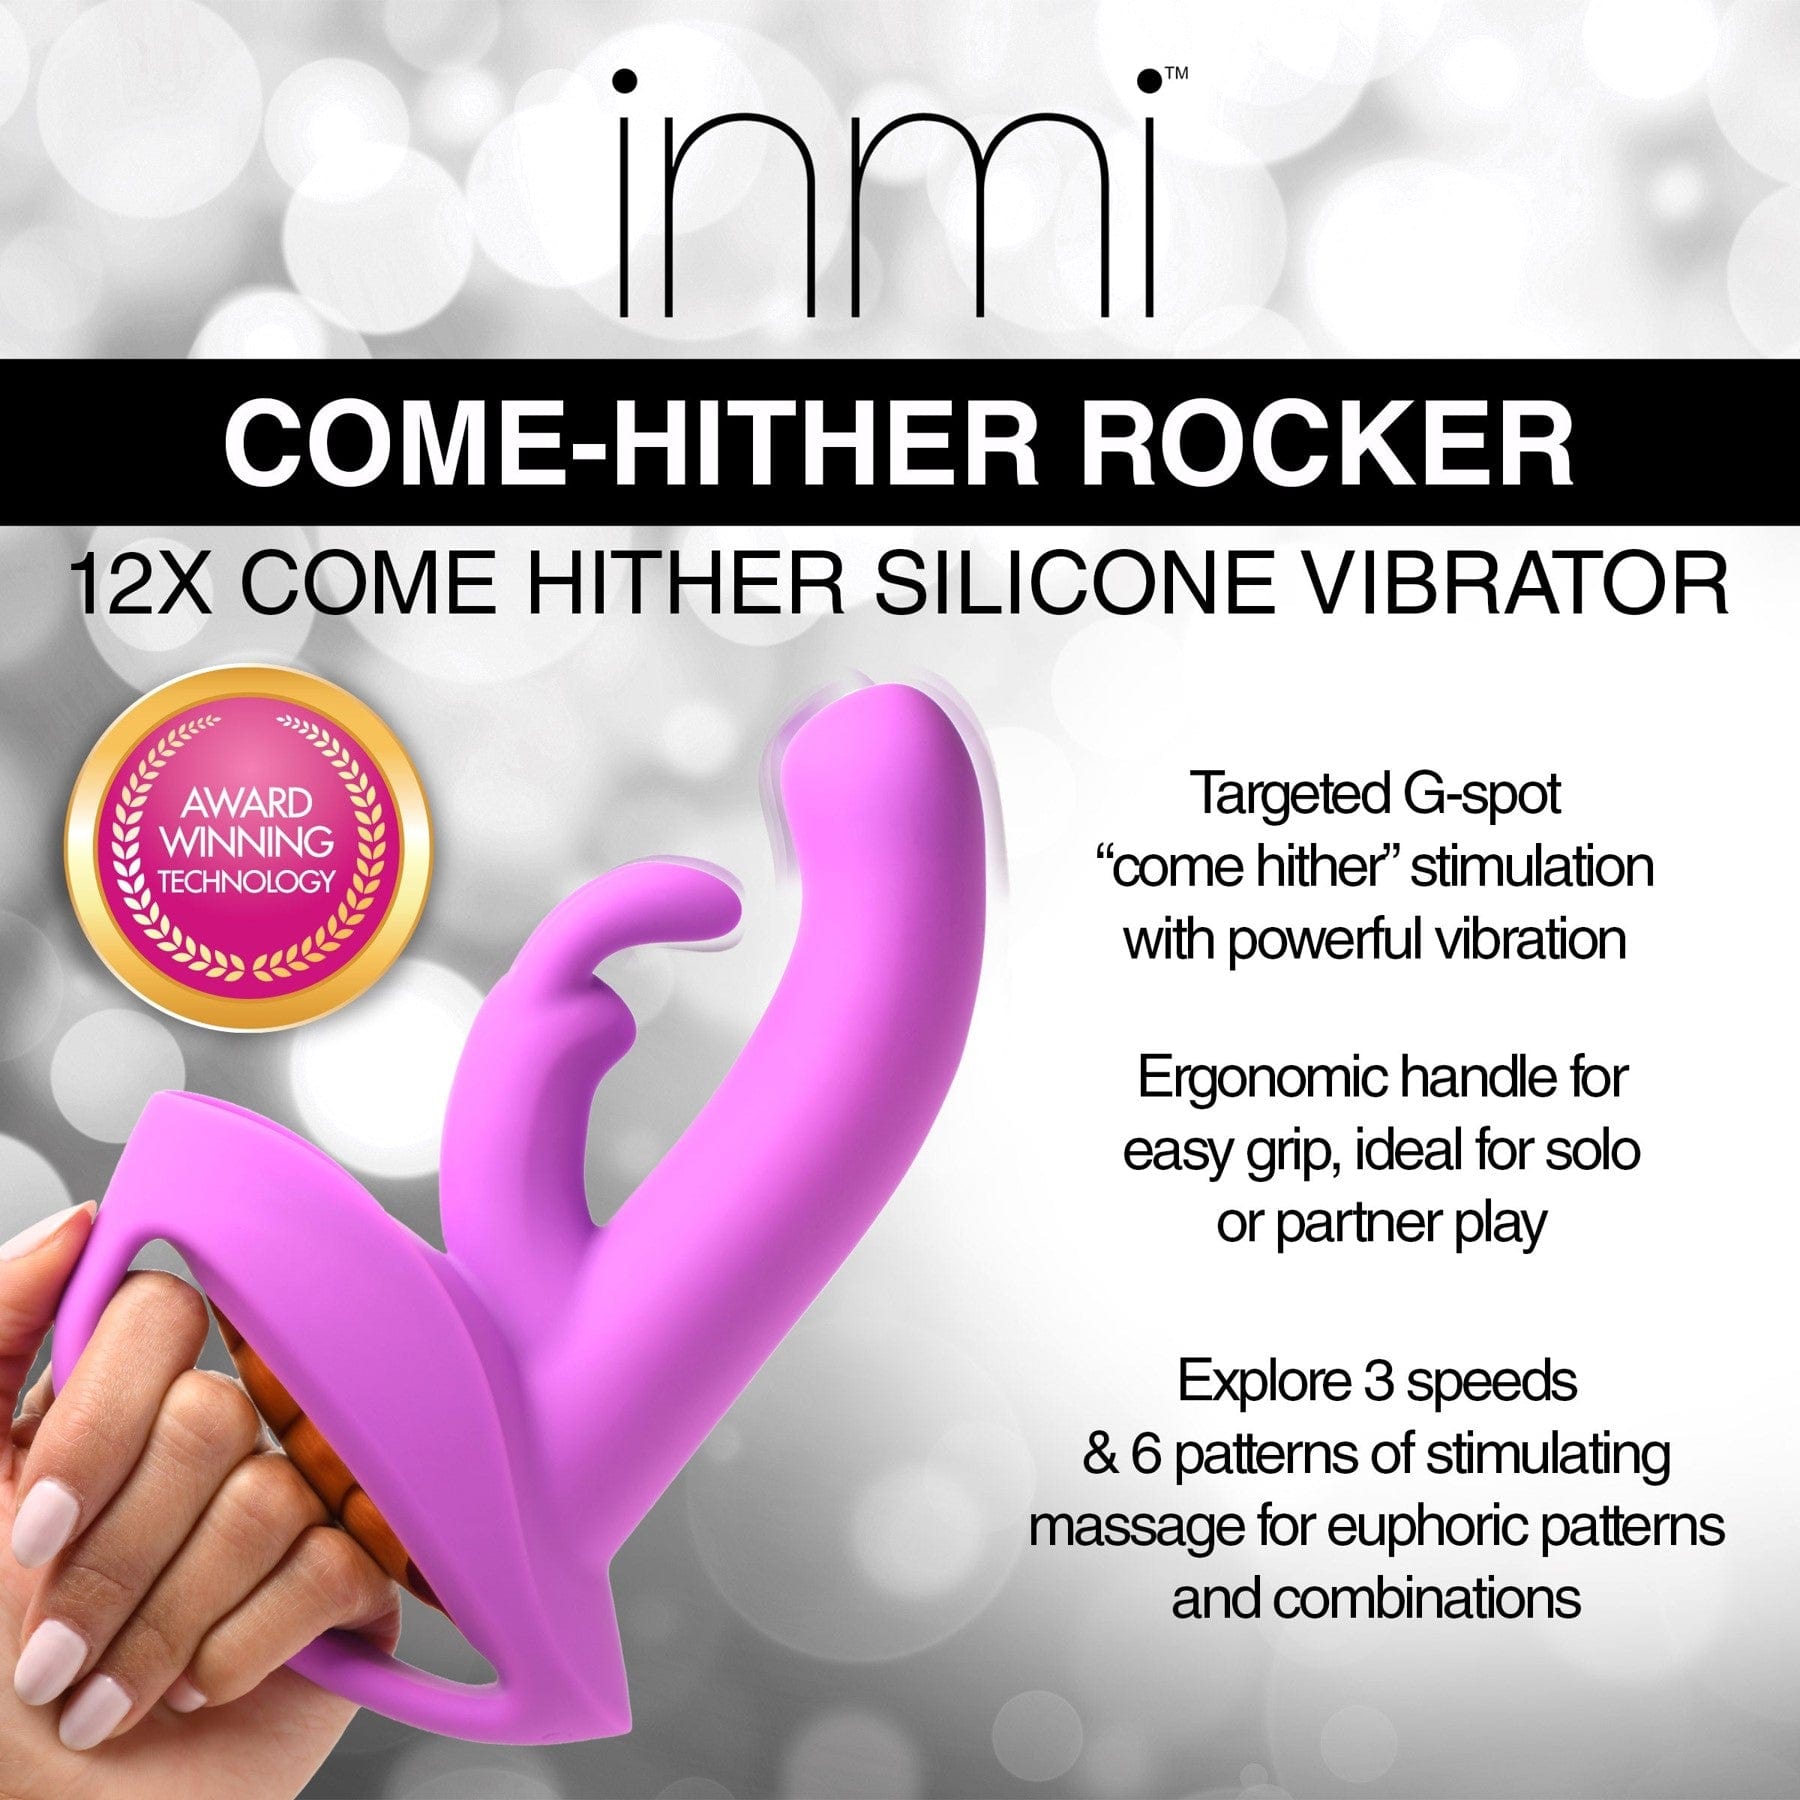 COME-HITHER ROCKER 10X COME HITHER SILICONE VIBRATOR